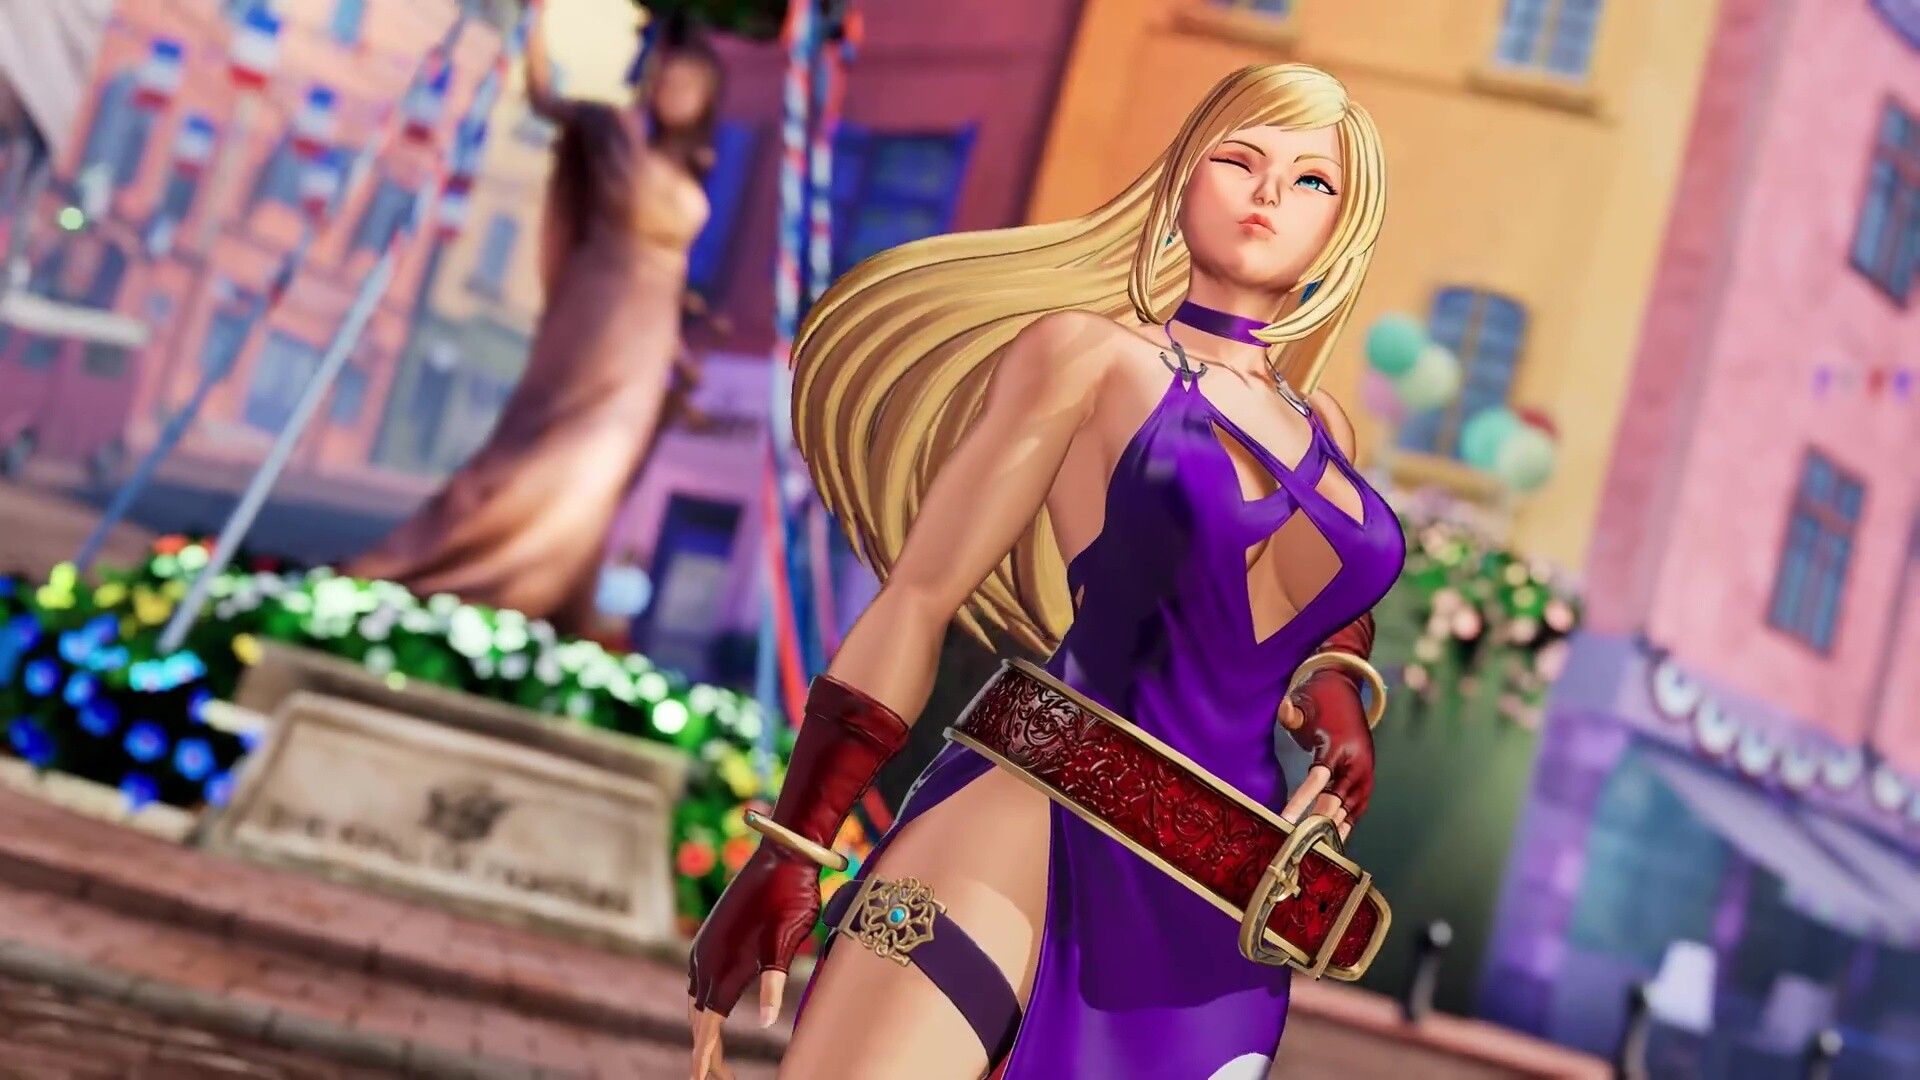 THE KING OF FIGHTERS XV B. Jenny enters the DLC in an erotic dress with and rounded thighs 6